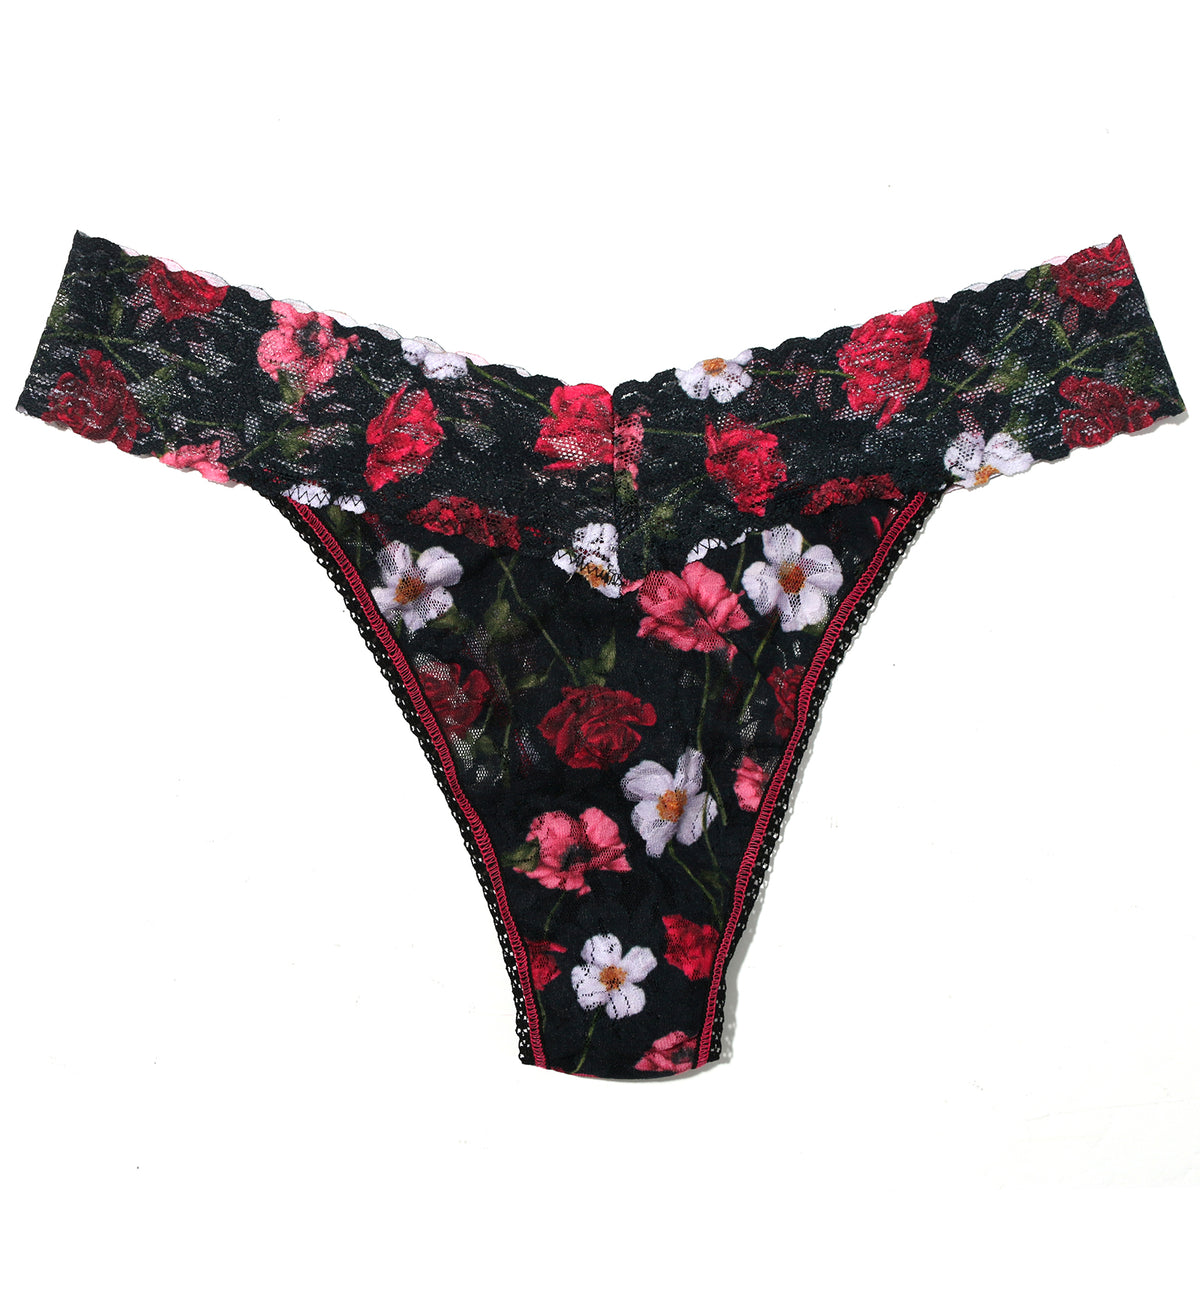 Hanky Panky Signature Lace Printed Original Rise Thong (PR4811P),Am I Dreaming - Am I Dreaming,One Size